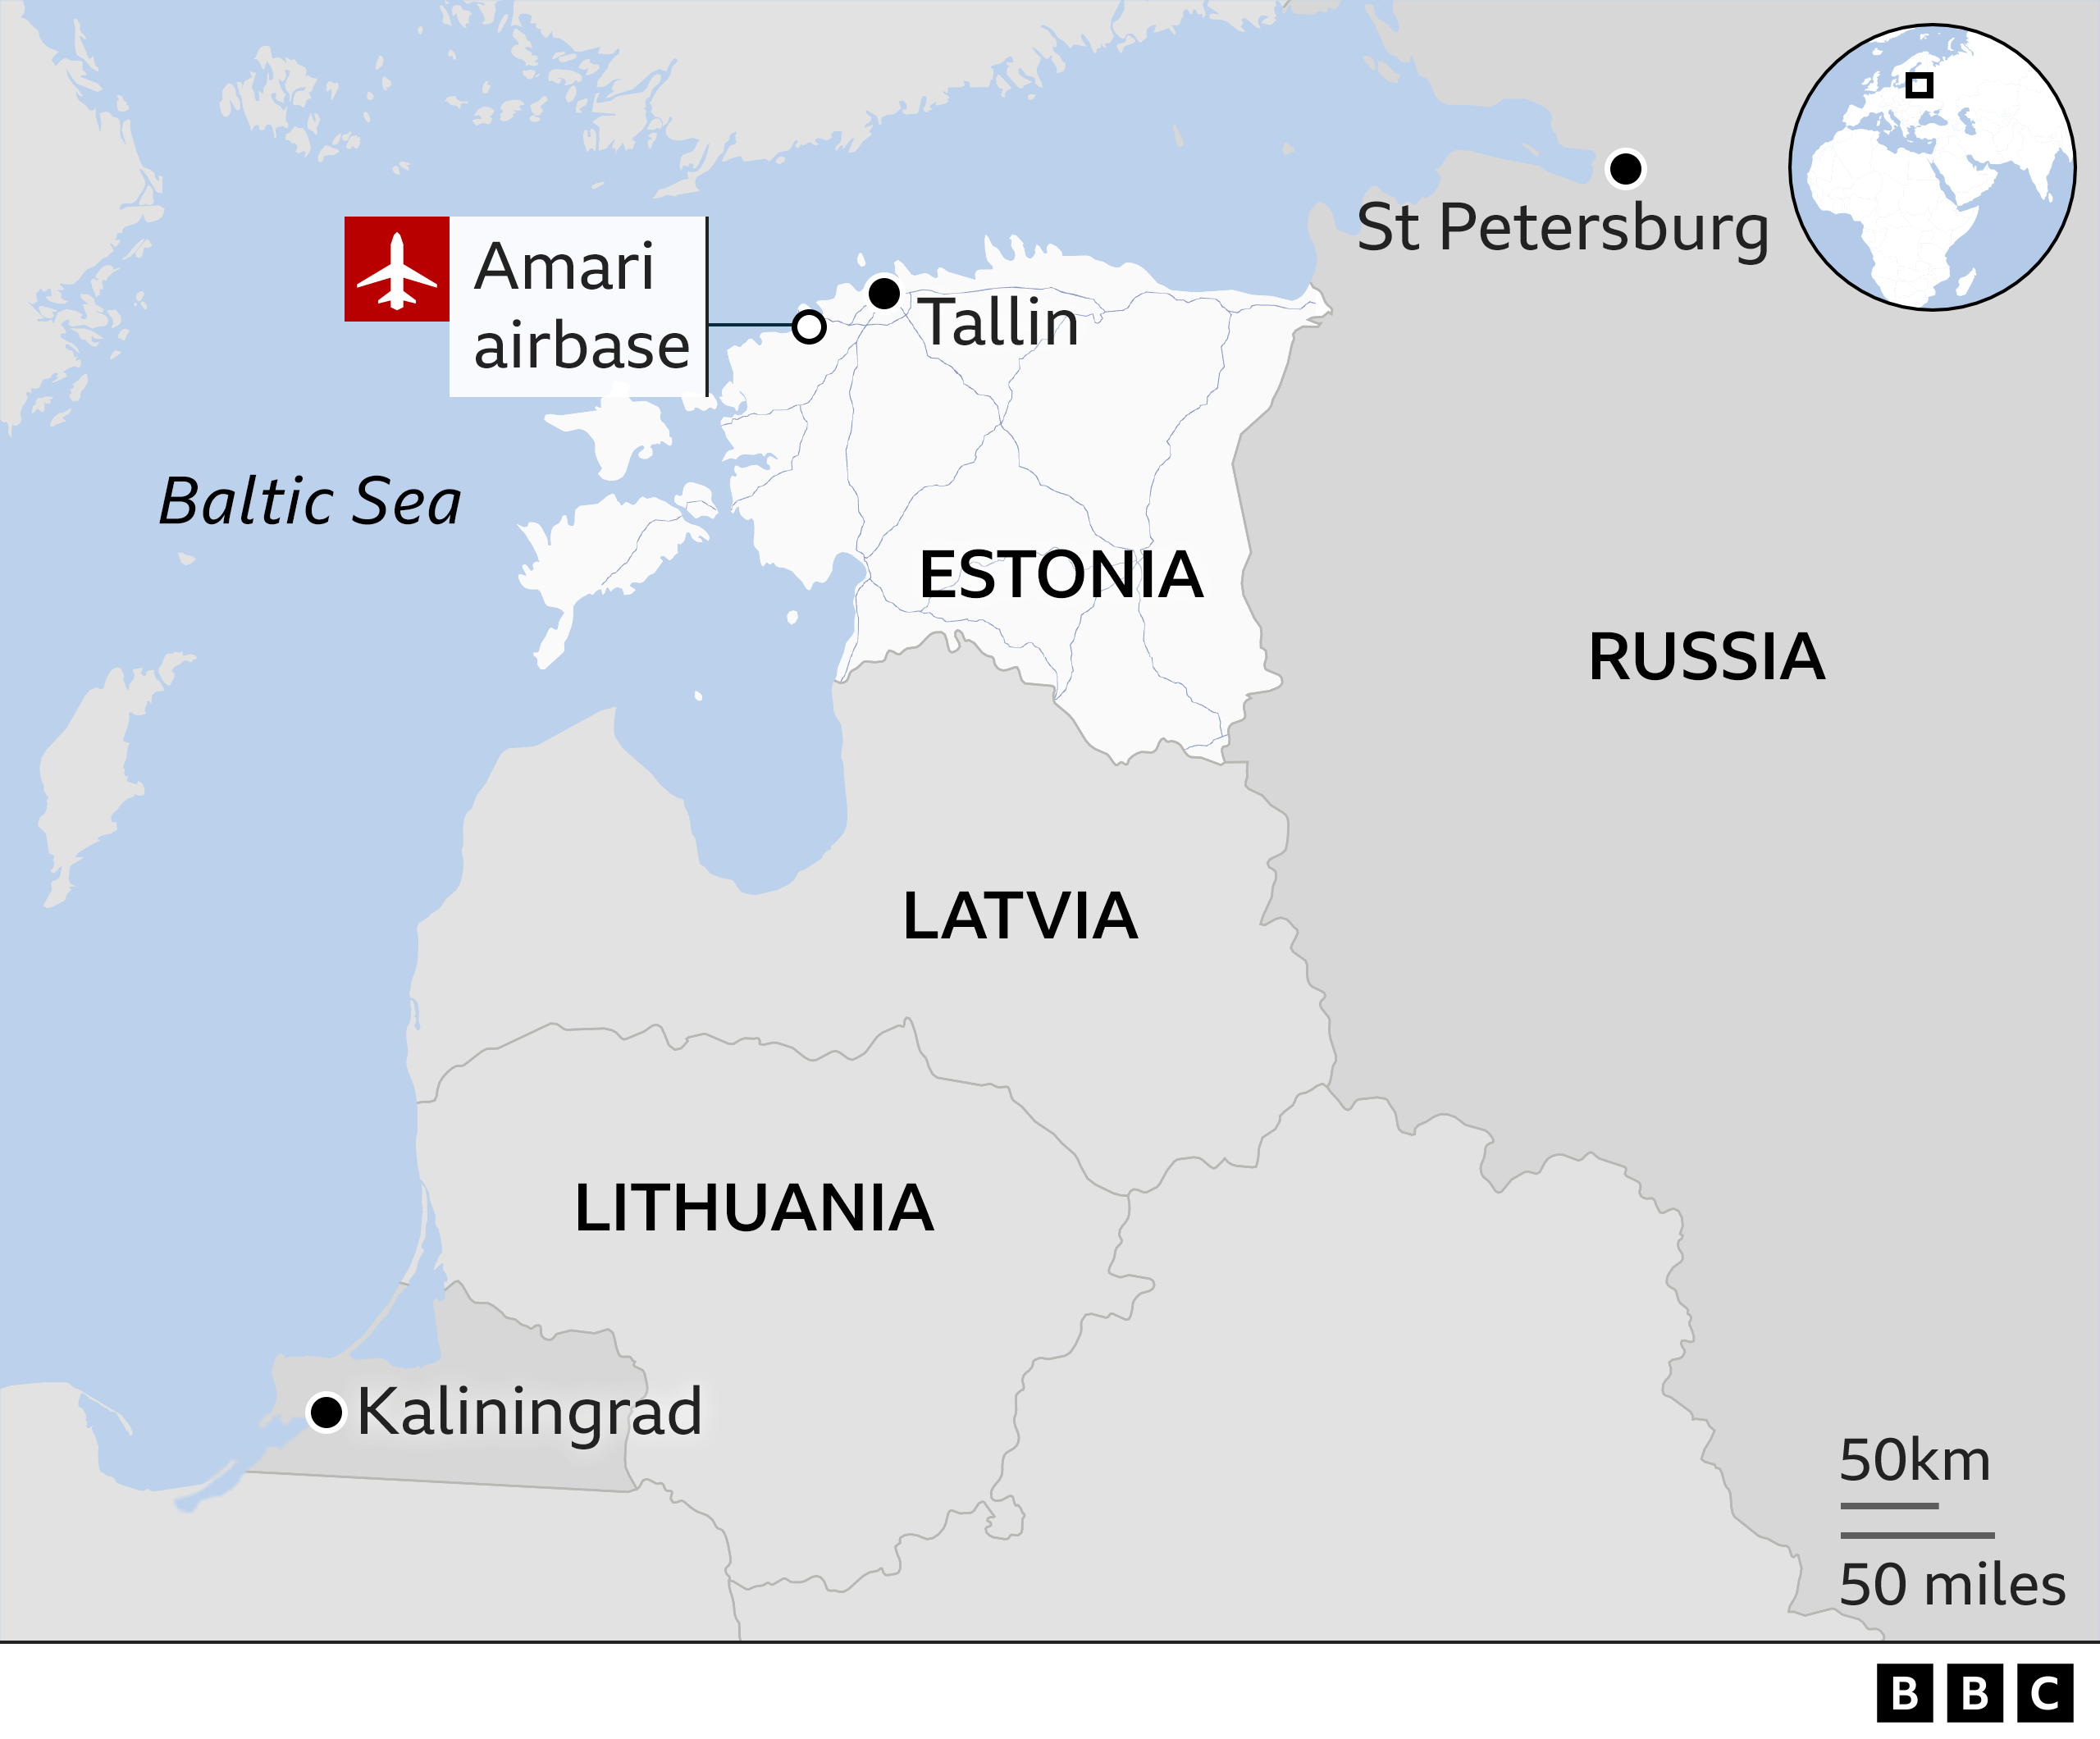 Map showing the Amari airbase in Estonia, alongside other Baltic states and the border with Russia